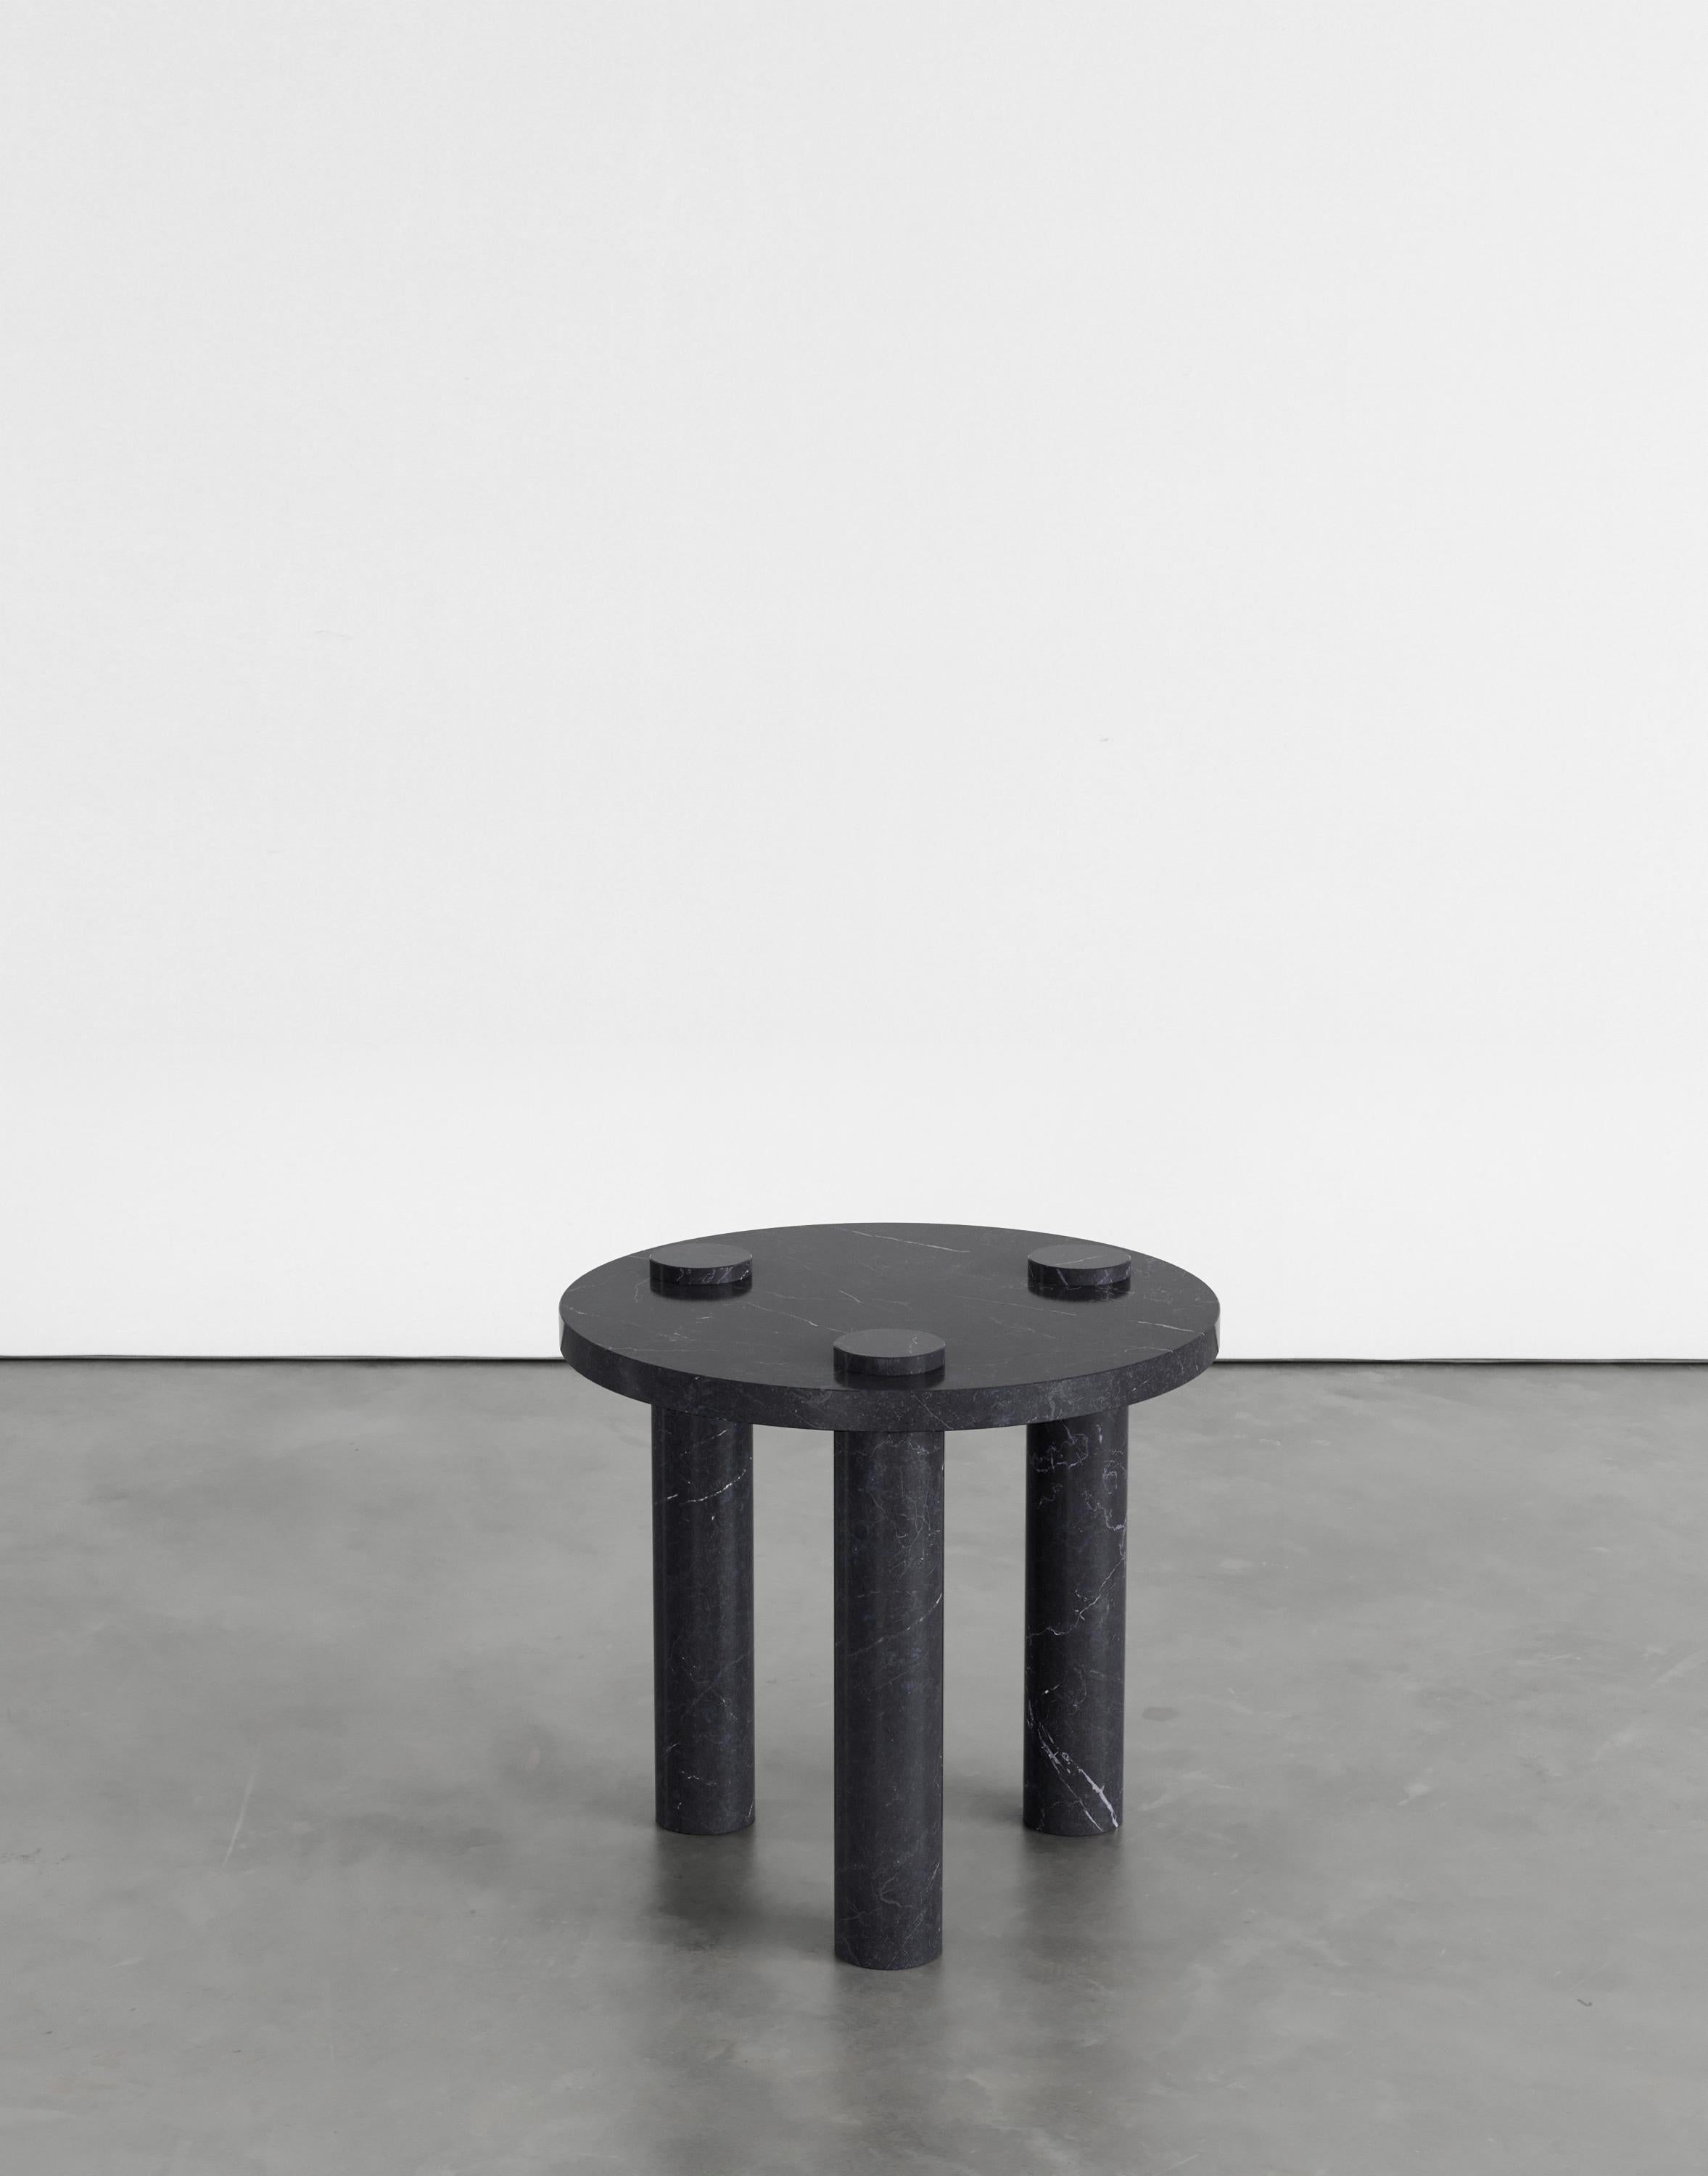 Sienna 50 Side Table by Agglomerati.
Dimensions: W 50 x H 45 cm. 
Materials: Black Marquina. Available in other stones. 

Agglomerati is a London-based studio creating distinctive stone furniture. Established in 2019 by Australian designer Sam